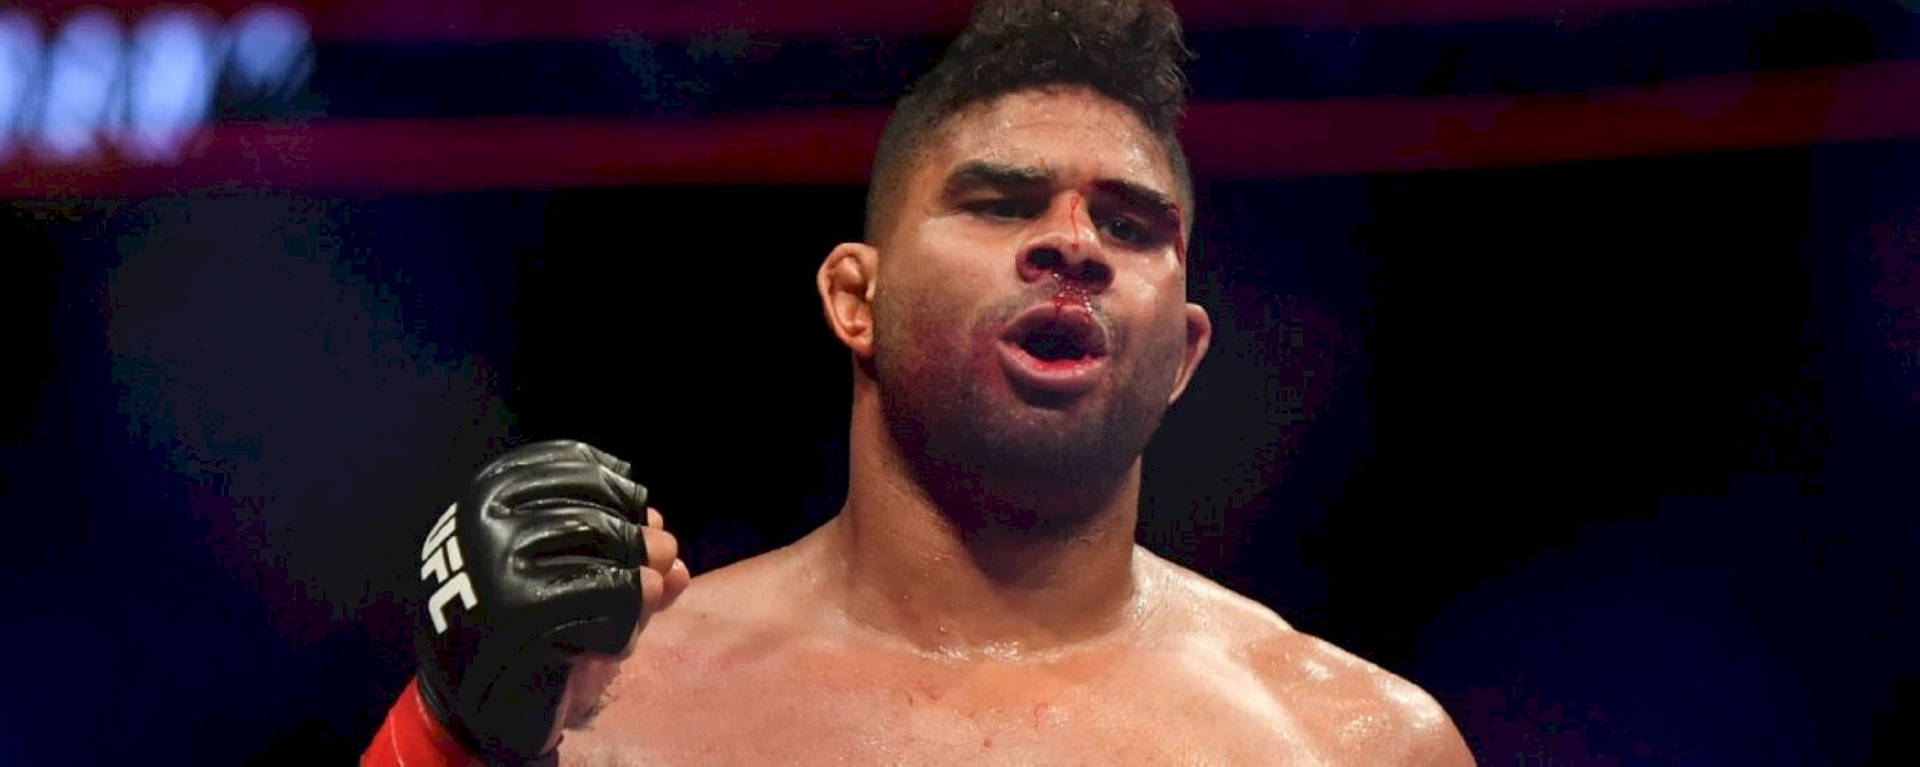 MMA Fighter Alistair Overeem Mouth Open Wallpaper